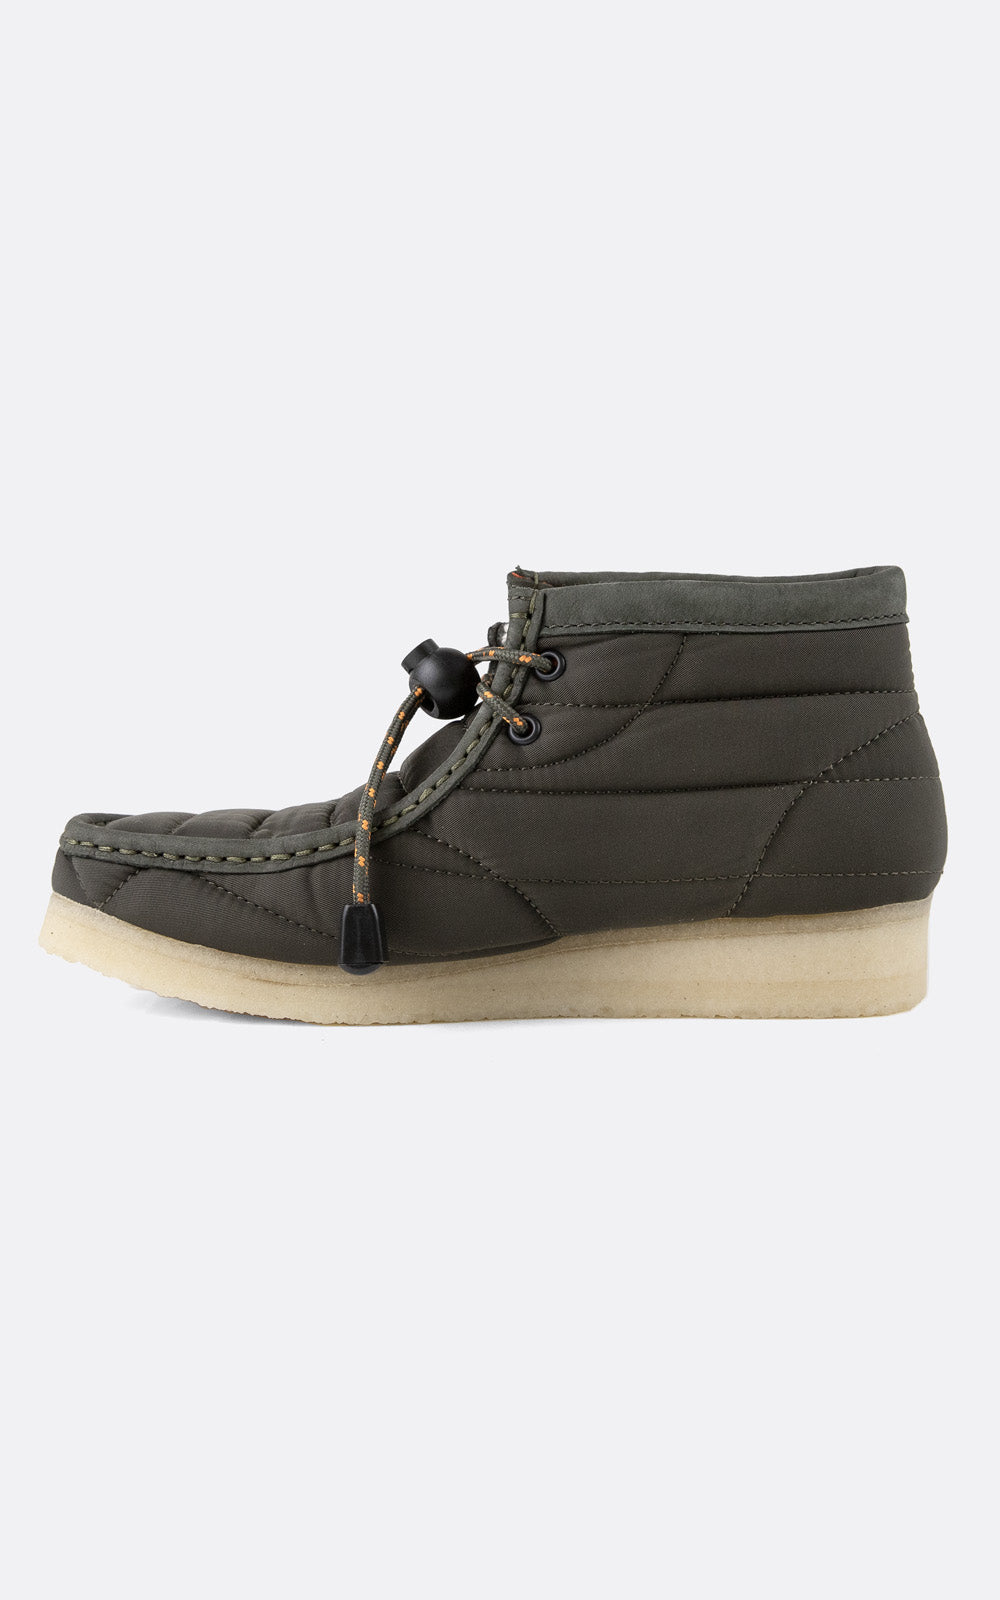 WALLABEE BOOT KHAKI QUILTED